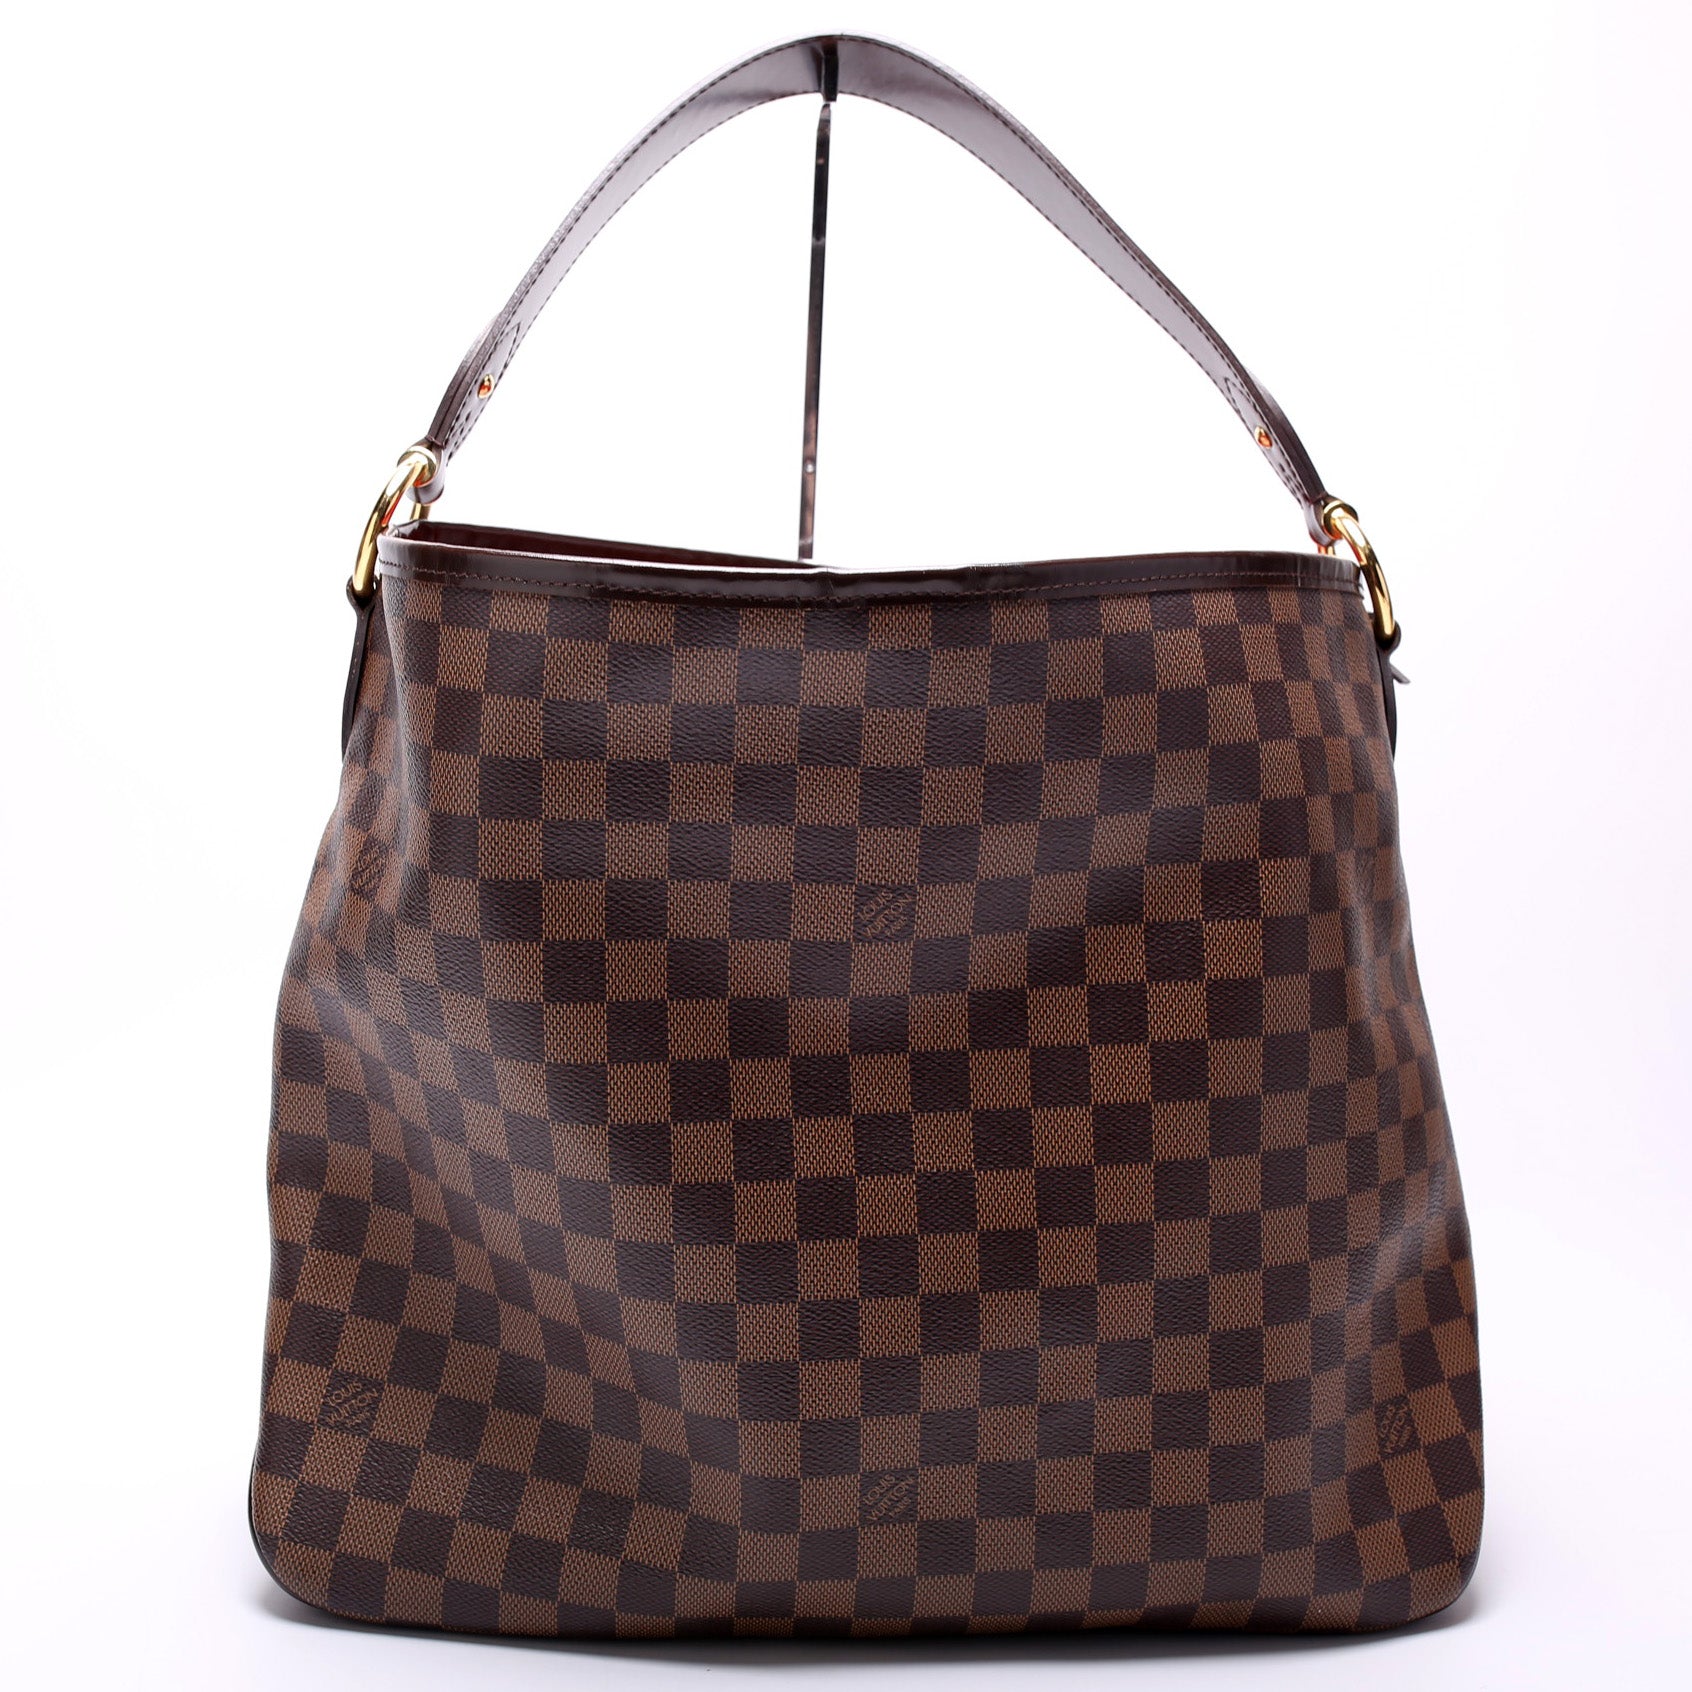 Women's Louis Vuitton Hobo bags and purses from $1,125